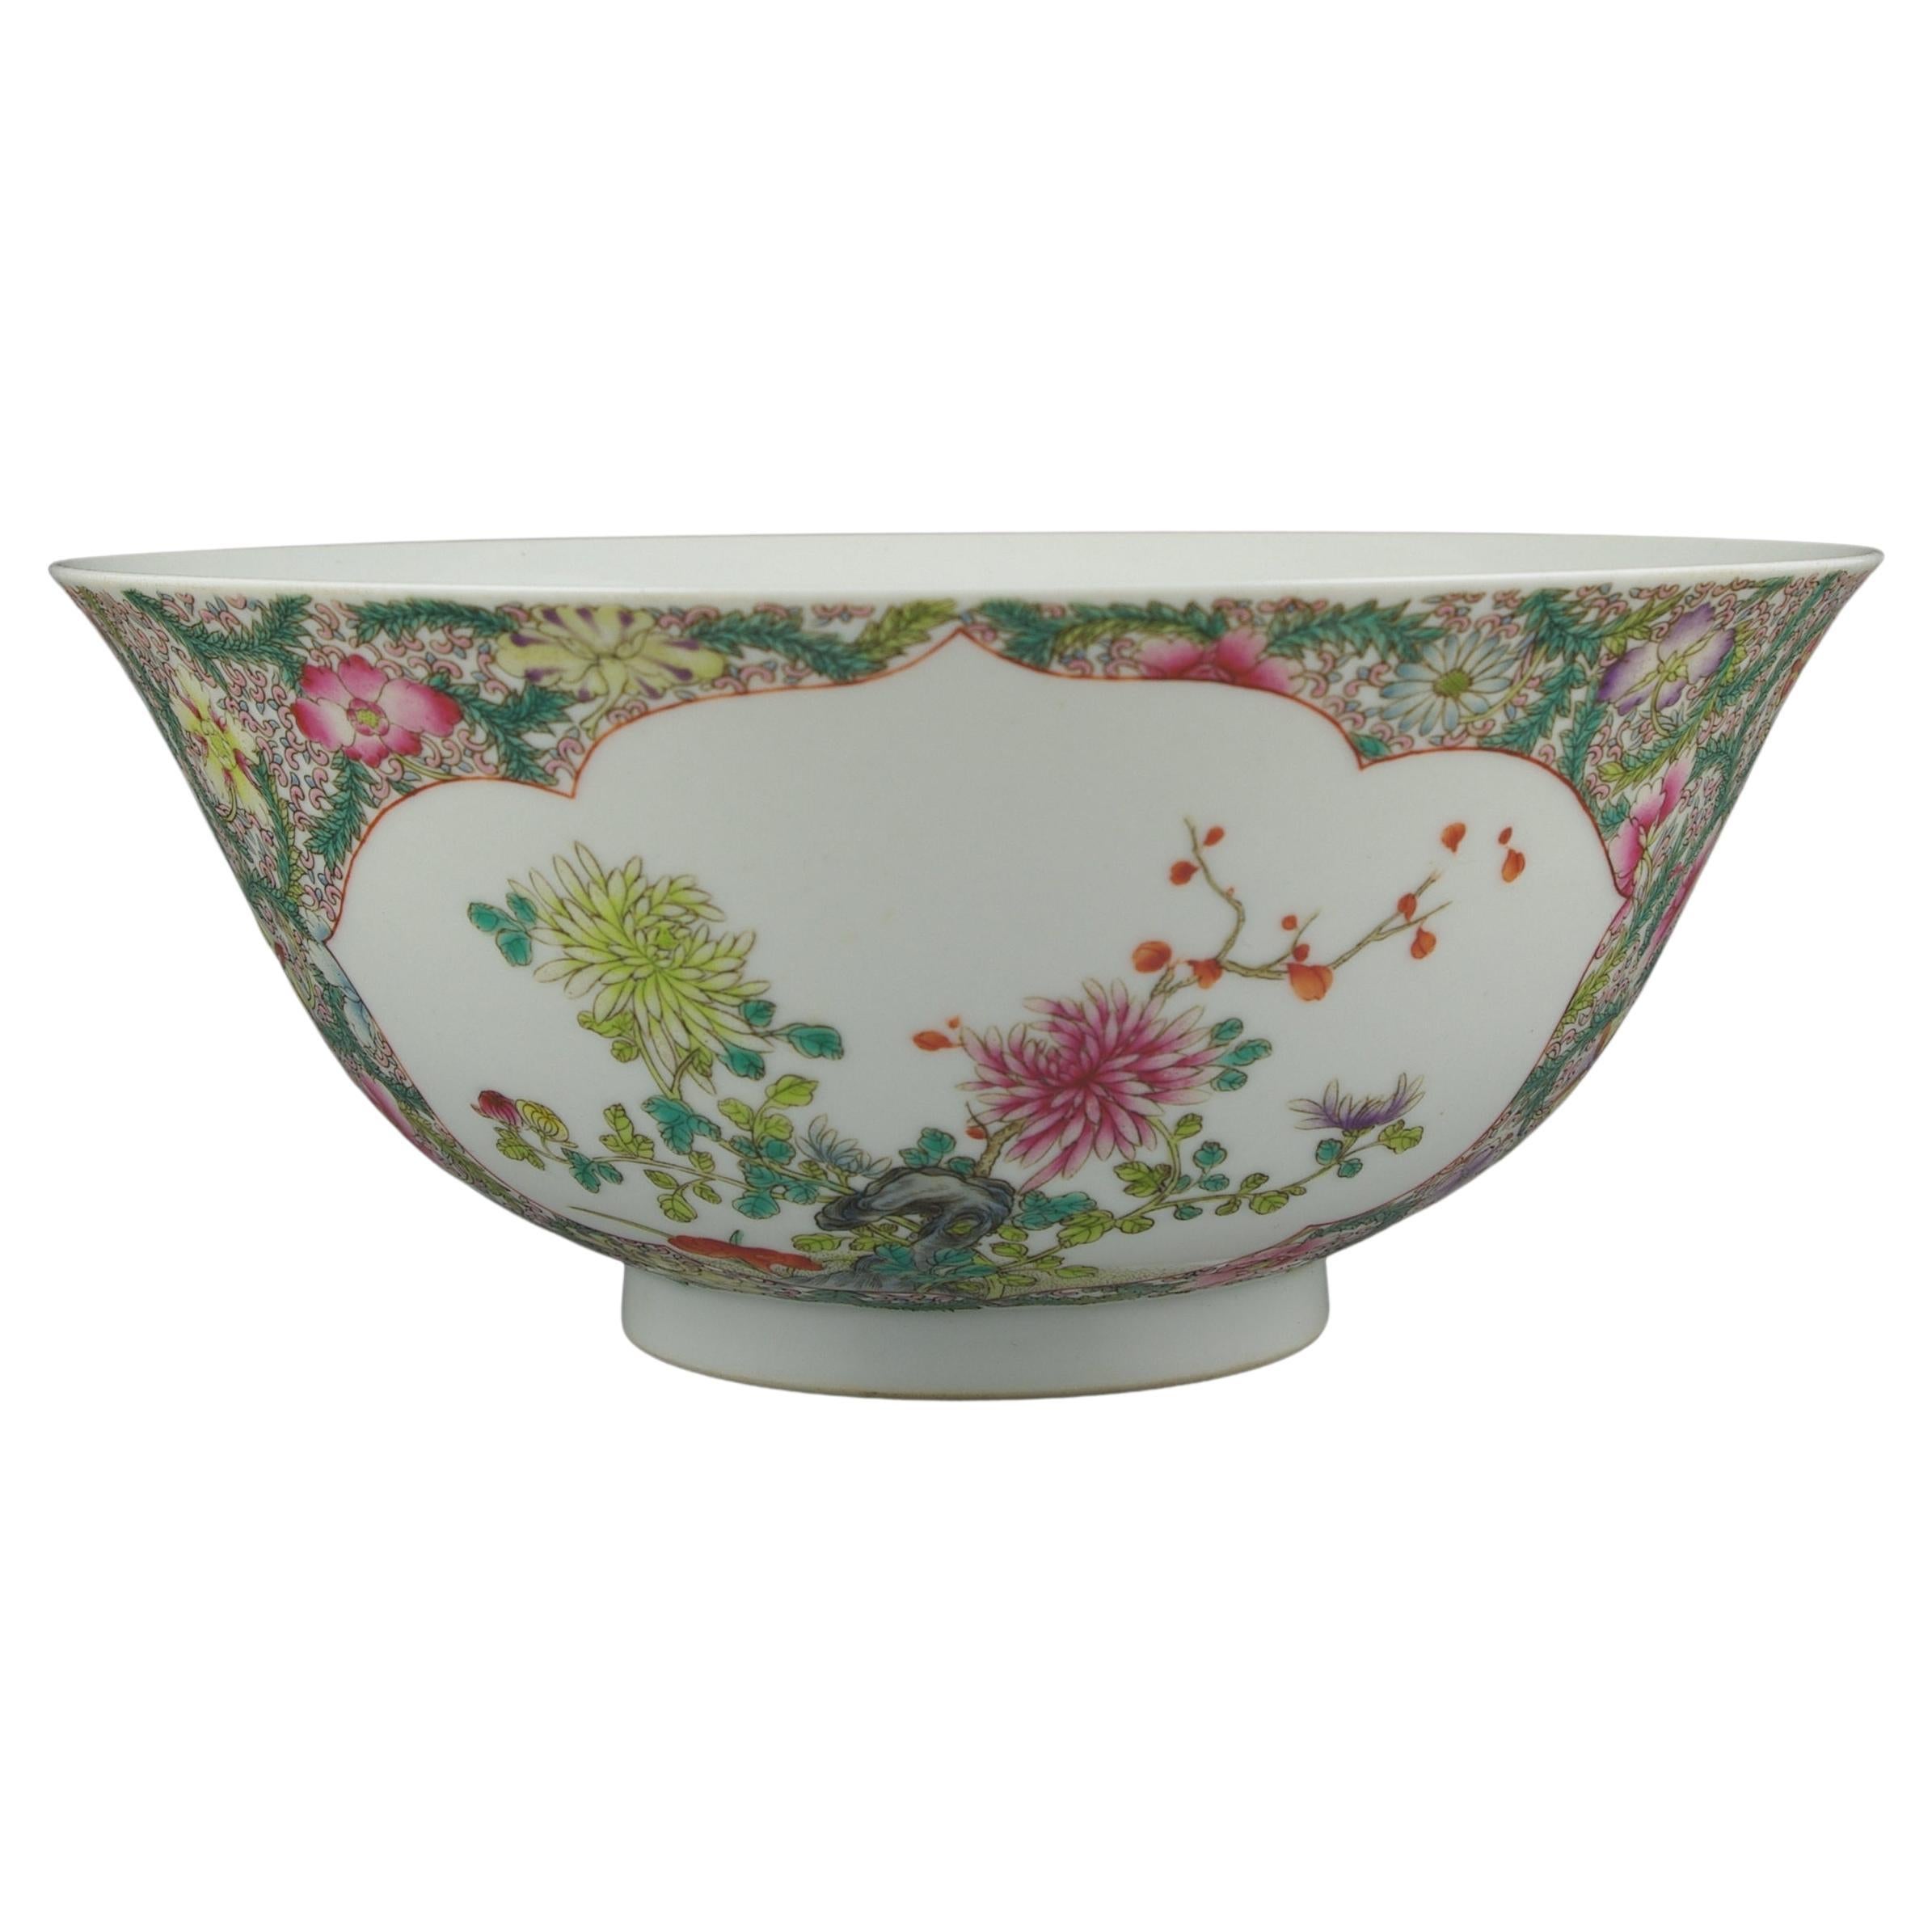 We are pleased to present this magnificent large Chinese porcelain bowl, a true testament to the artistry and craftsmanship that defines Chinese porcelain art. The bowl enchants with its intricate design, featuring finely painted blossoms, leaves,